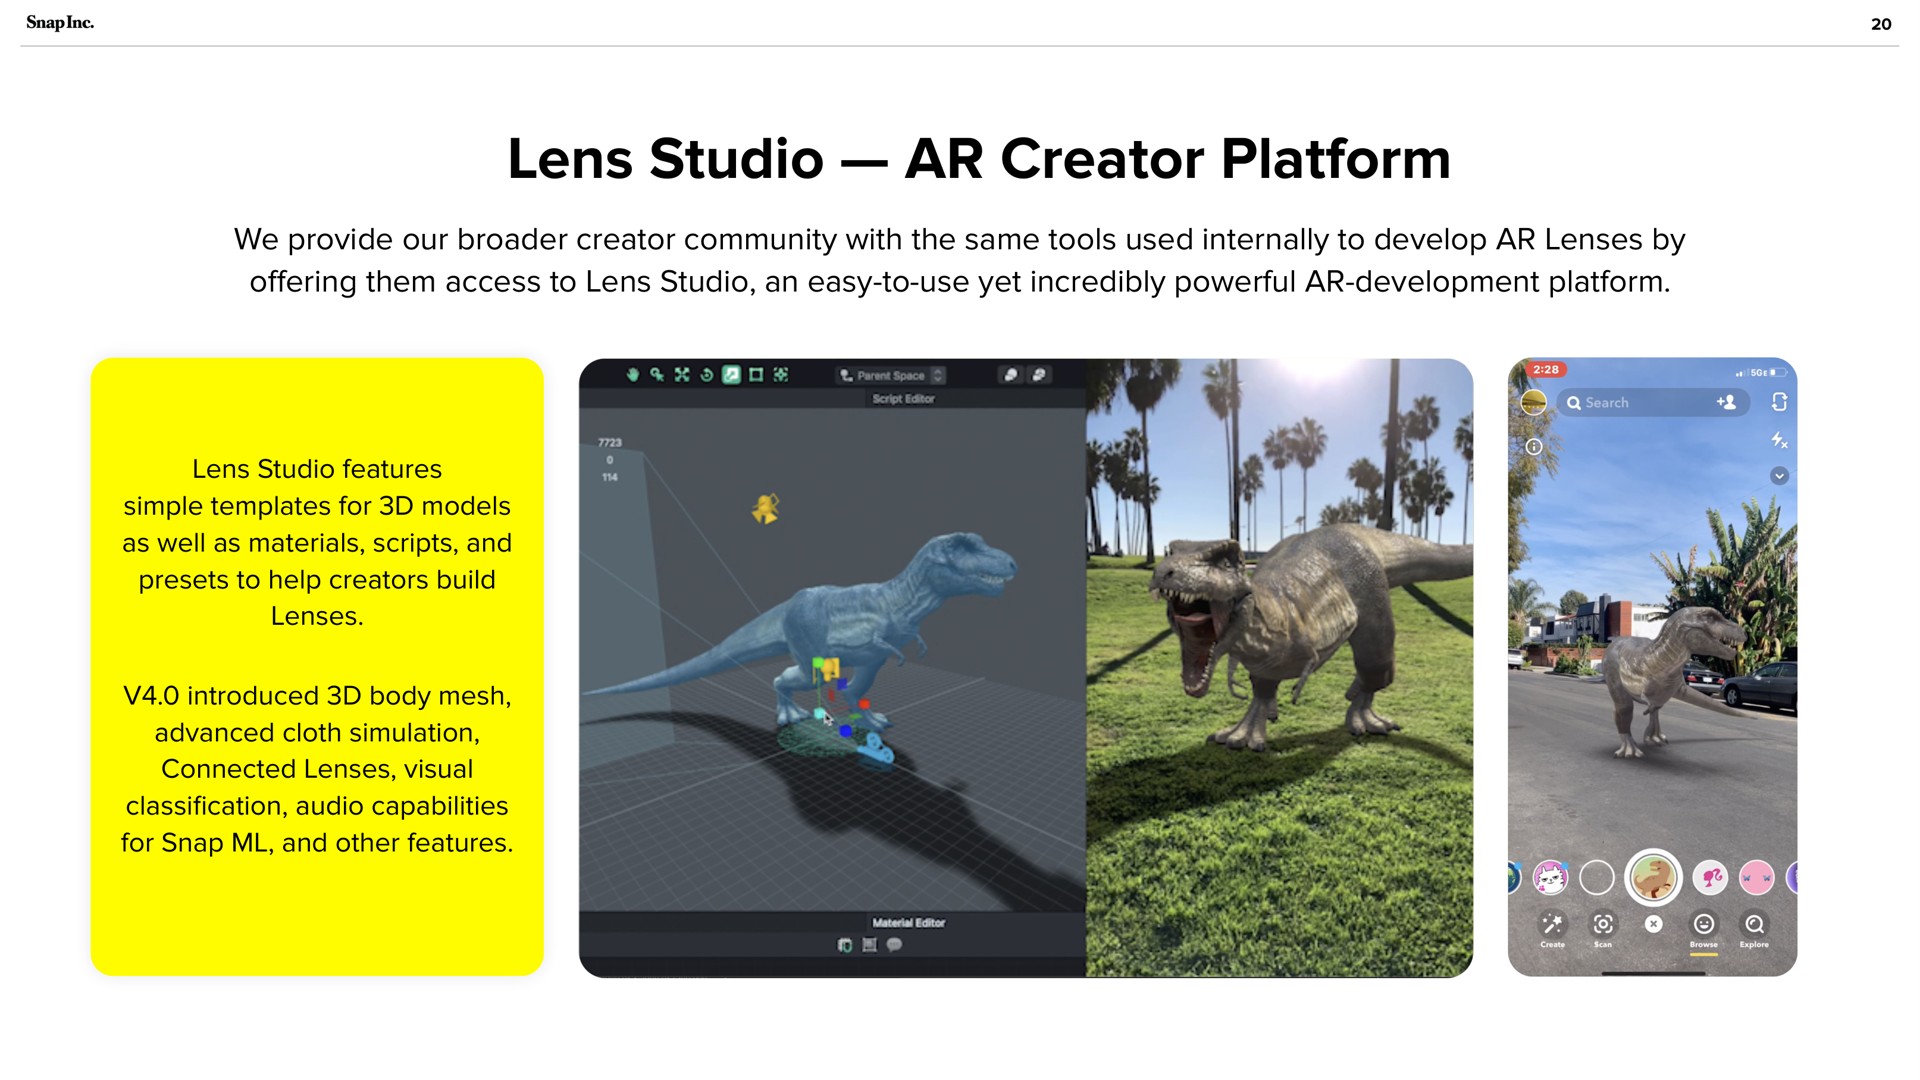 lens studio creator platform we provide our community with the same tools used internally to develop lenses by offering them access to an easy to use yet incredibly powerful development | Snap Inc